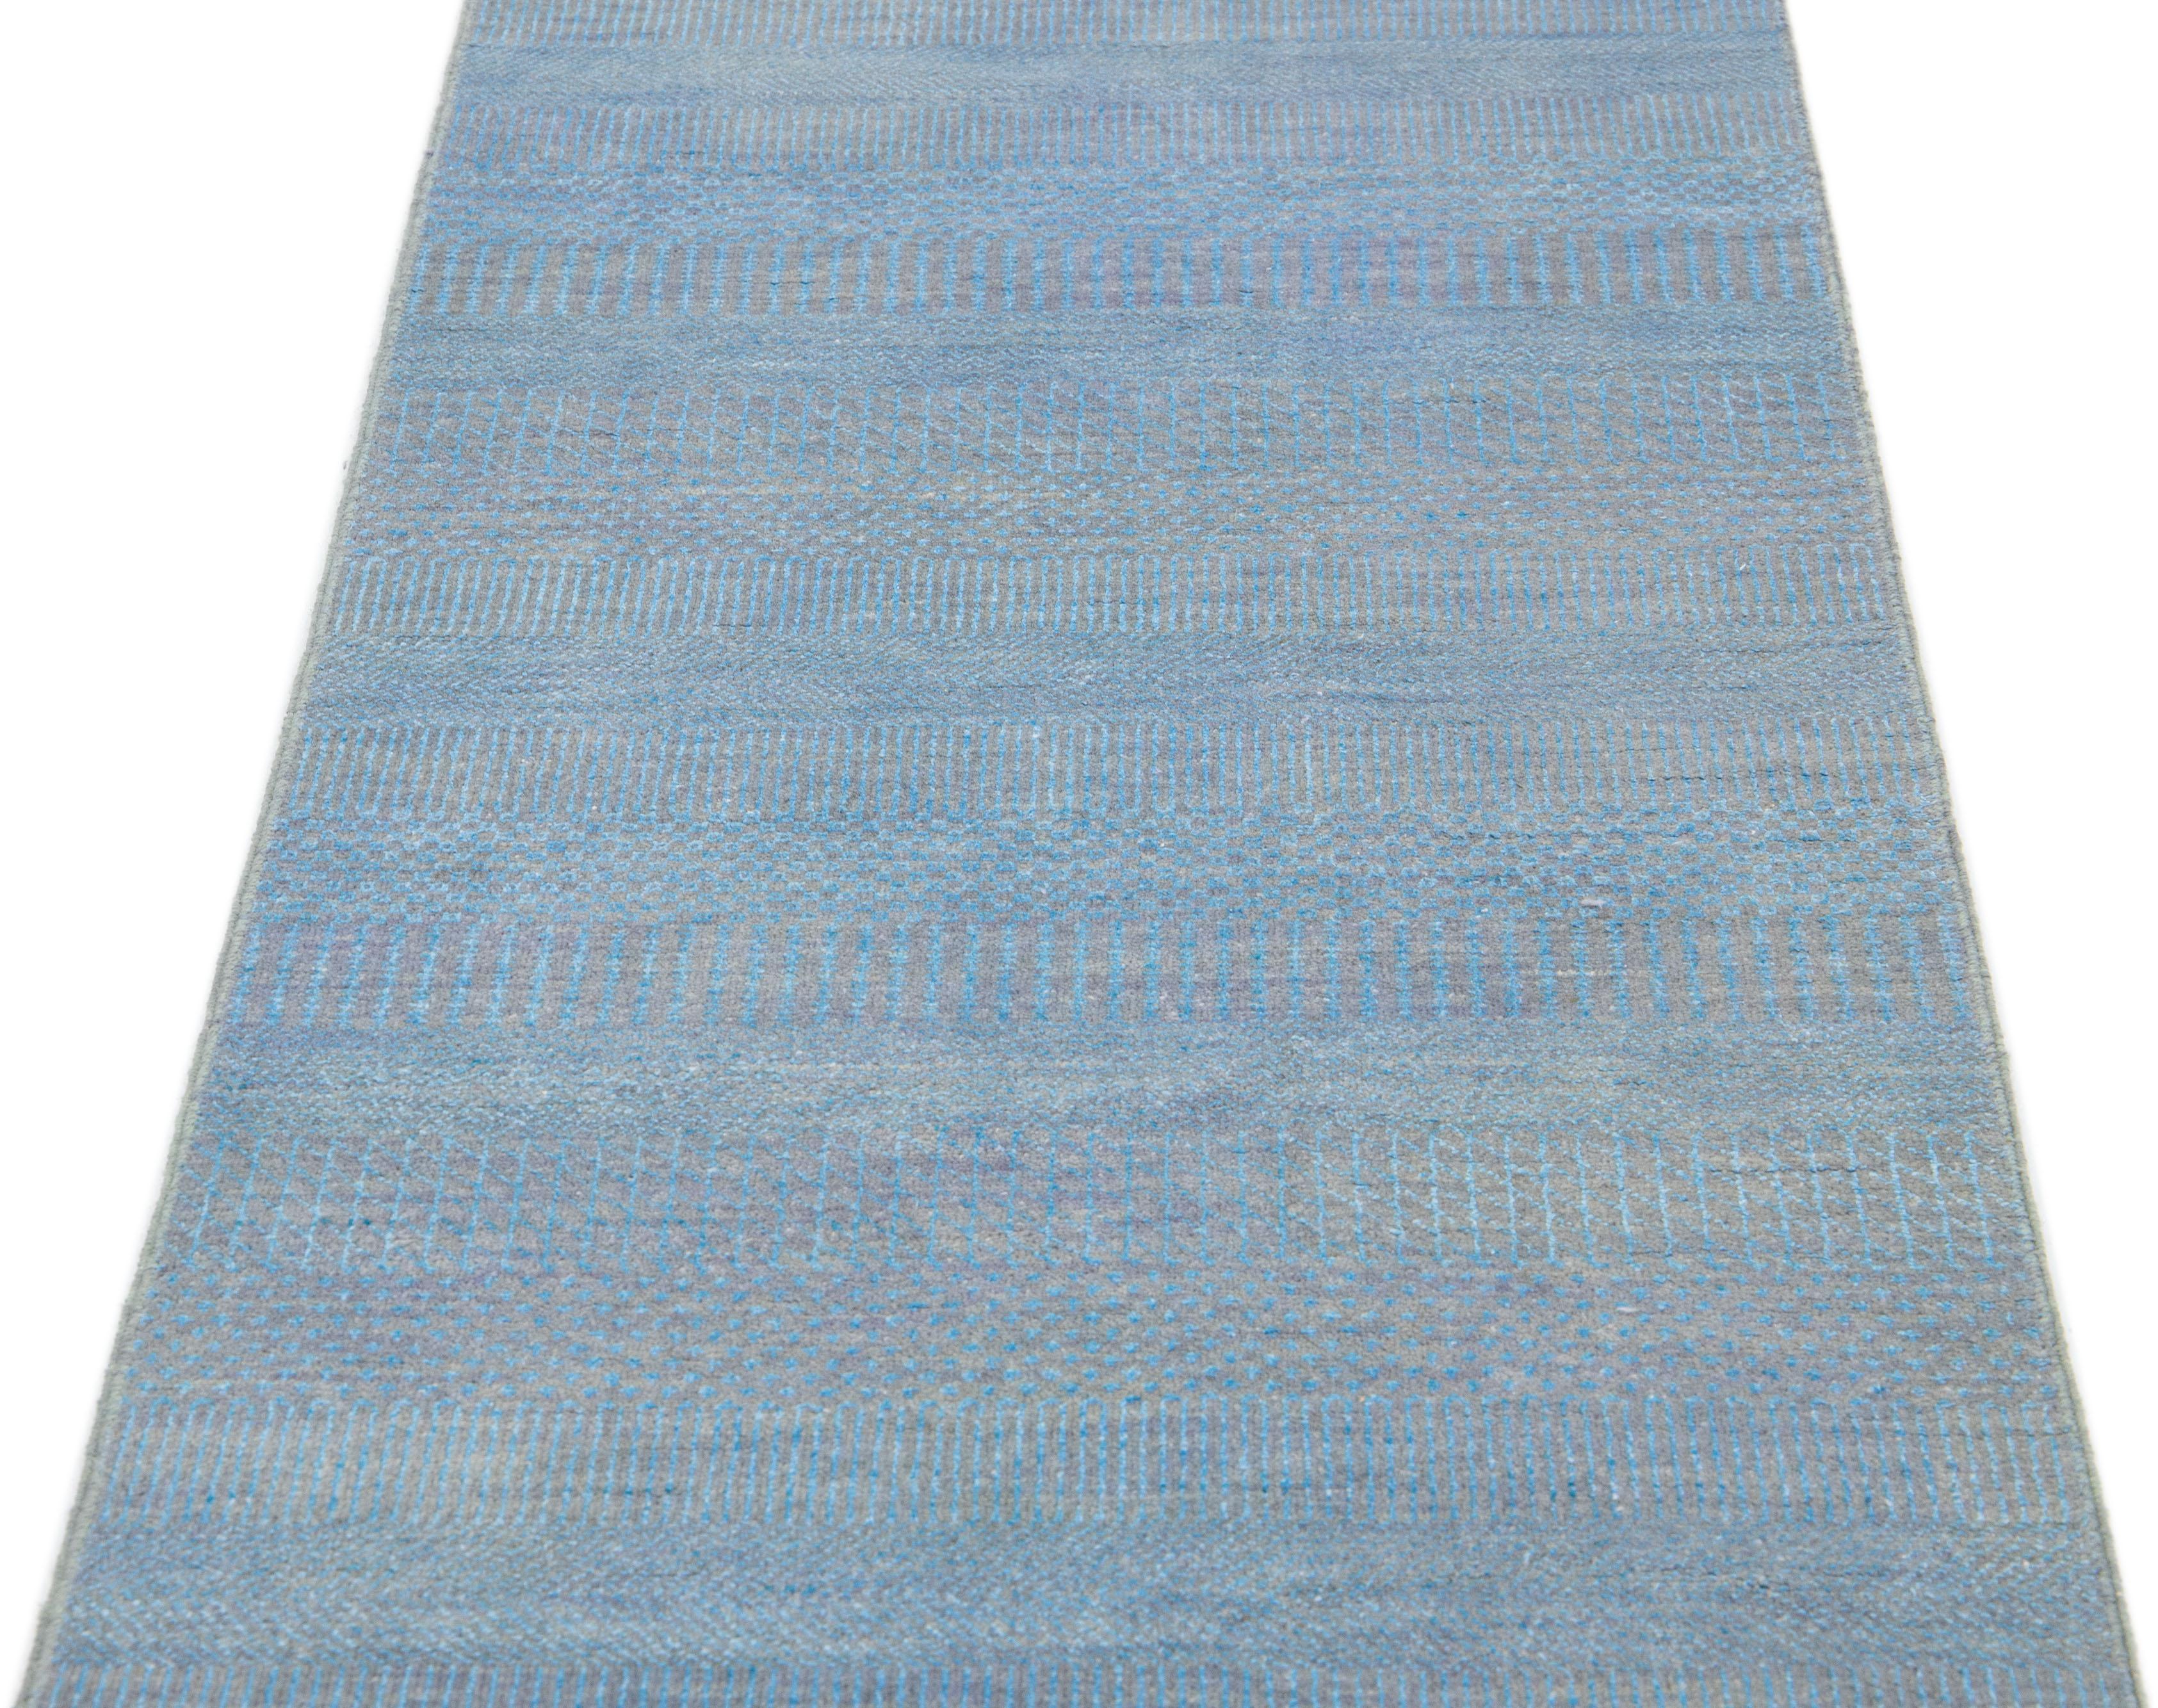 This long hand-knotted rug is made of wool. It features a subtle light blue color scheme accented by an all-over geometric pattern—an ideal addition to any contemporary interior.

This rug measures 2'7